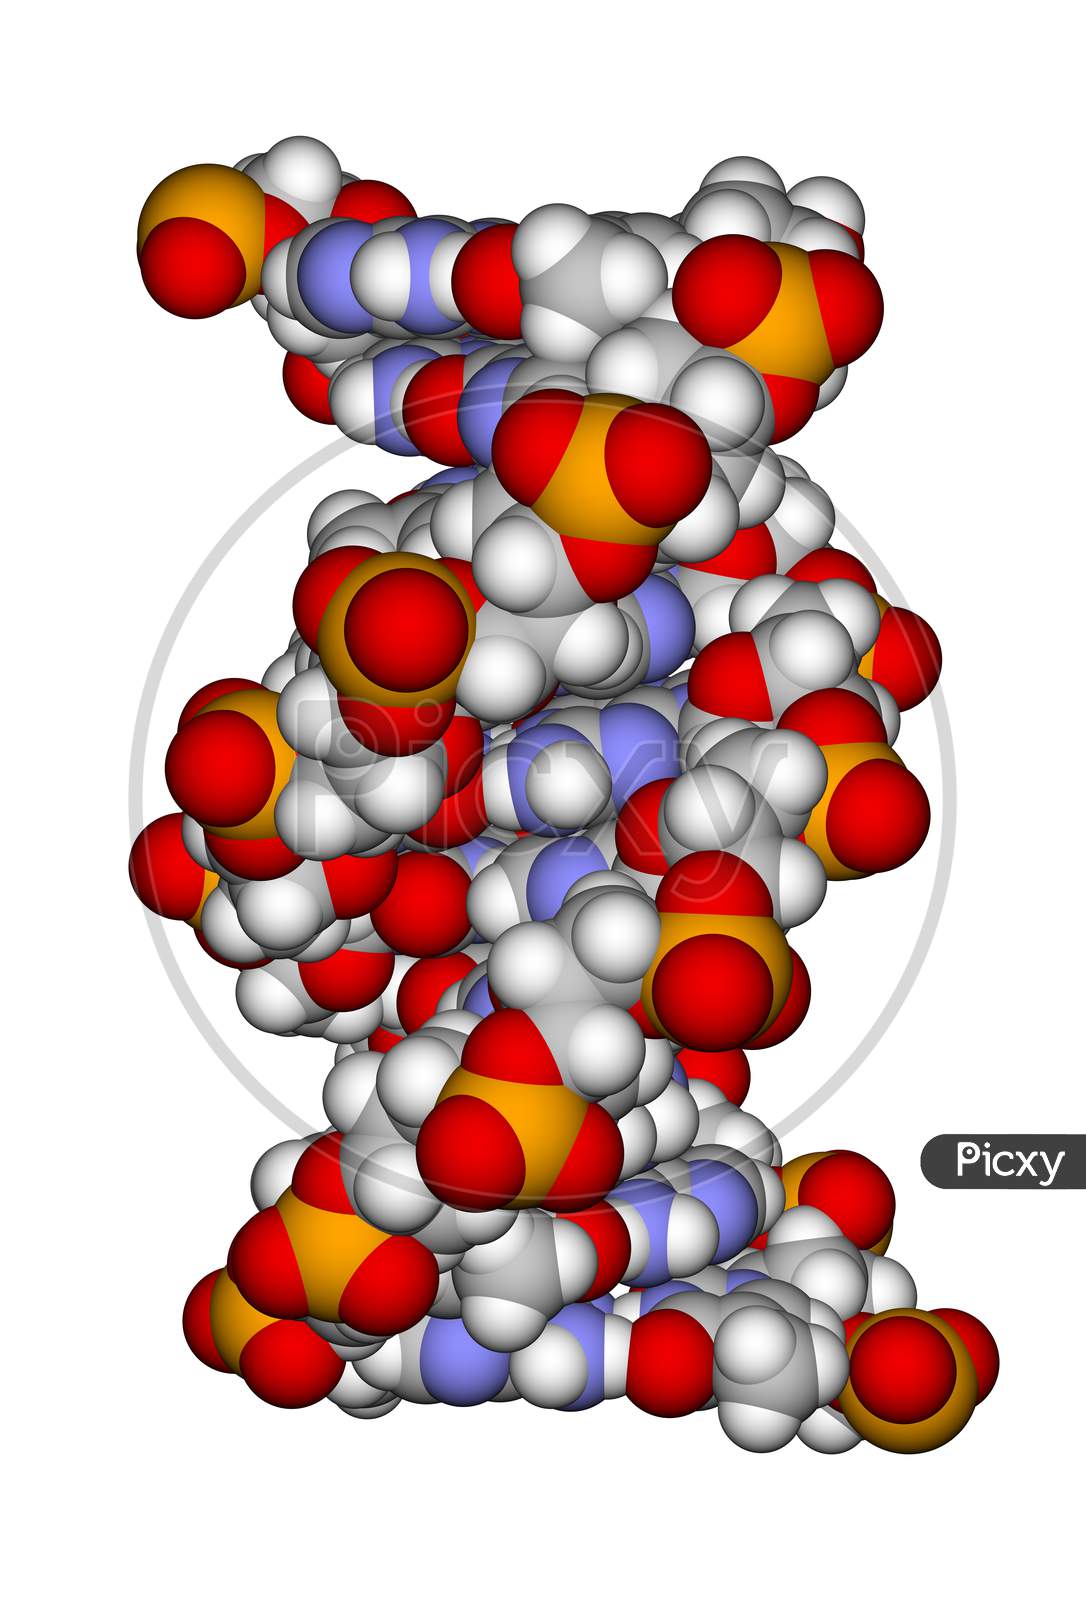 Part Of A Dna Double Helix (A Space Filling Model)